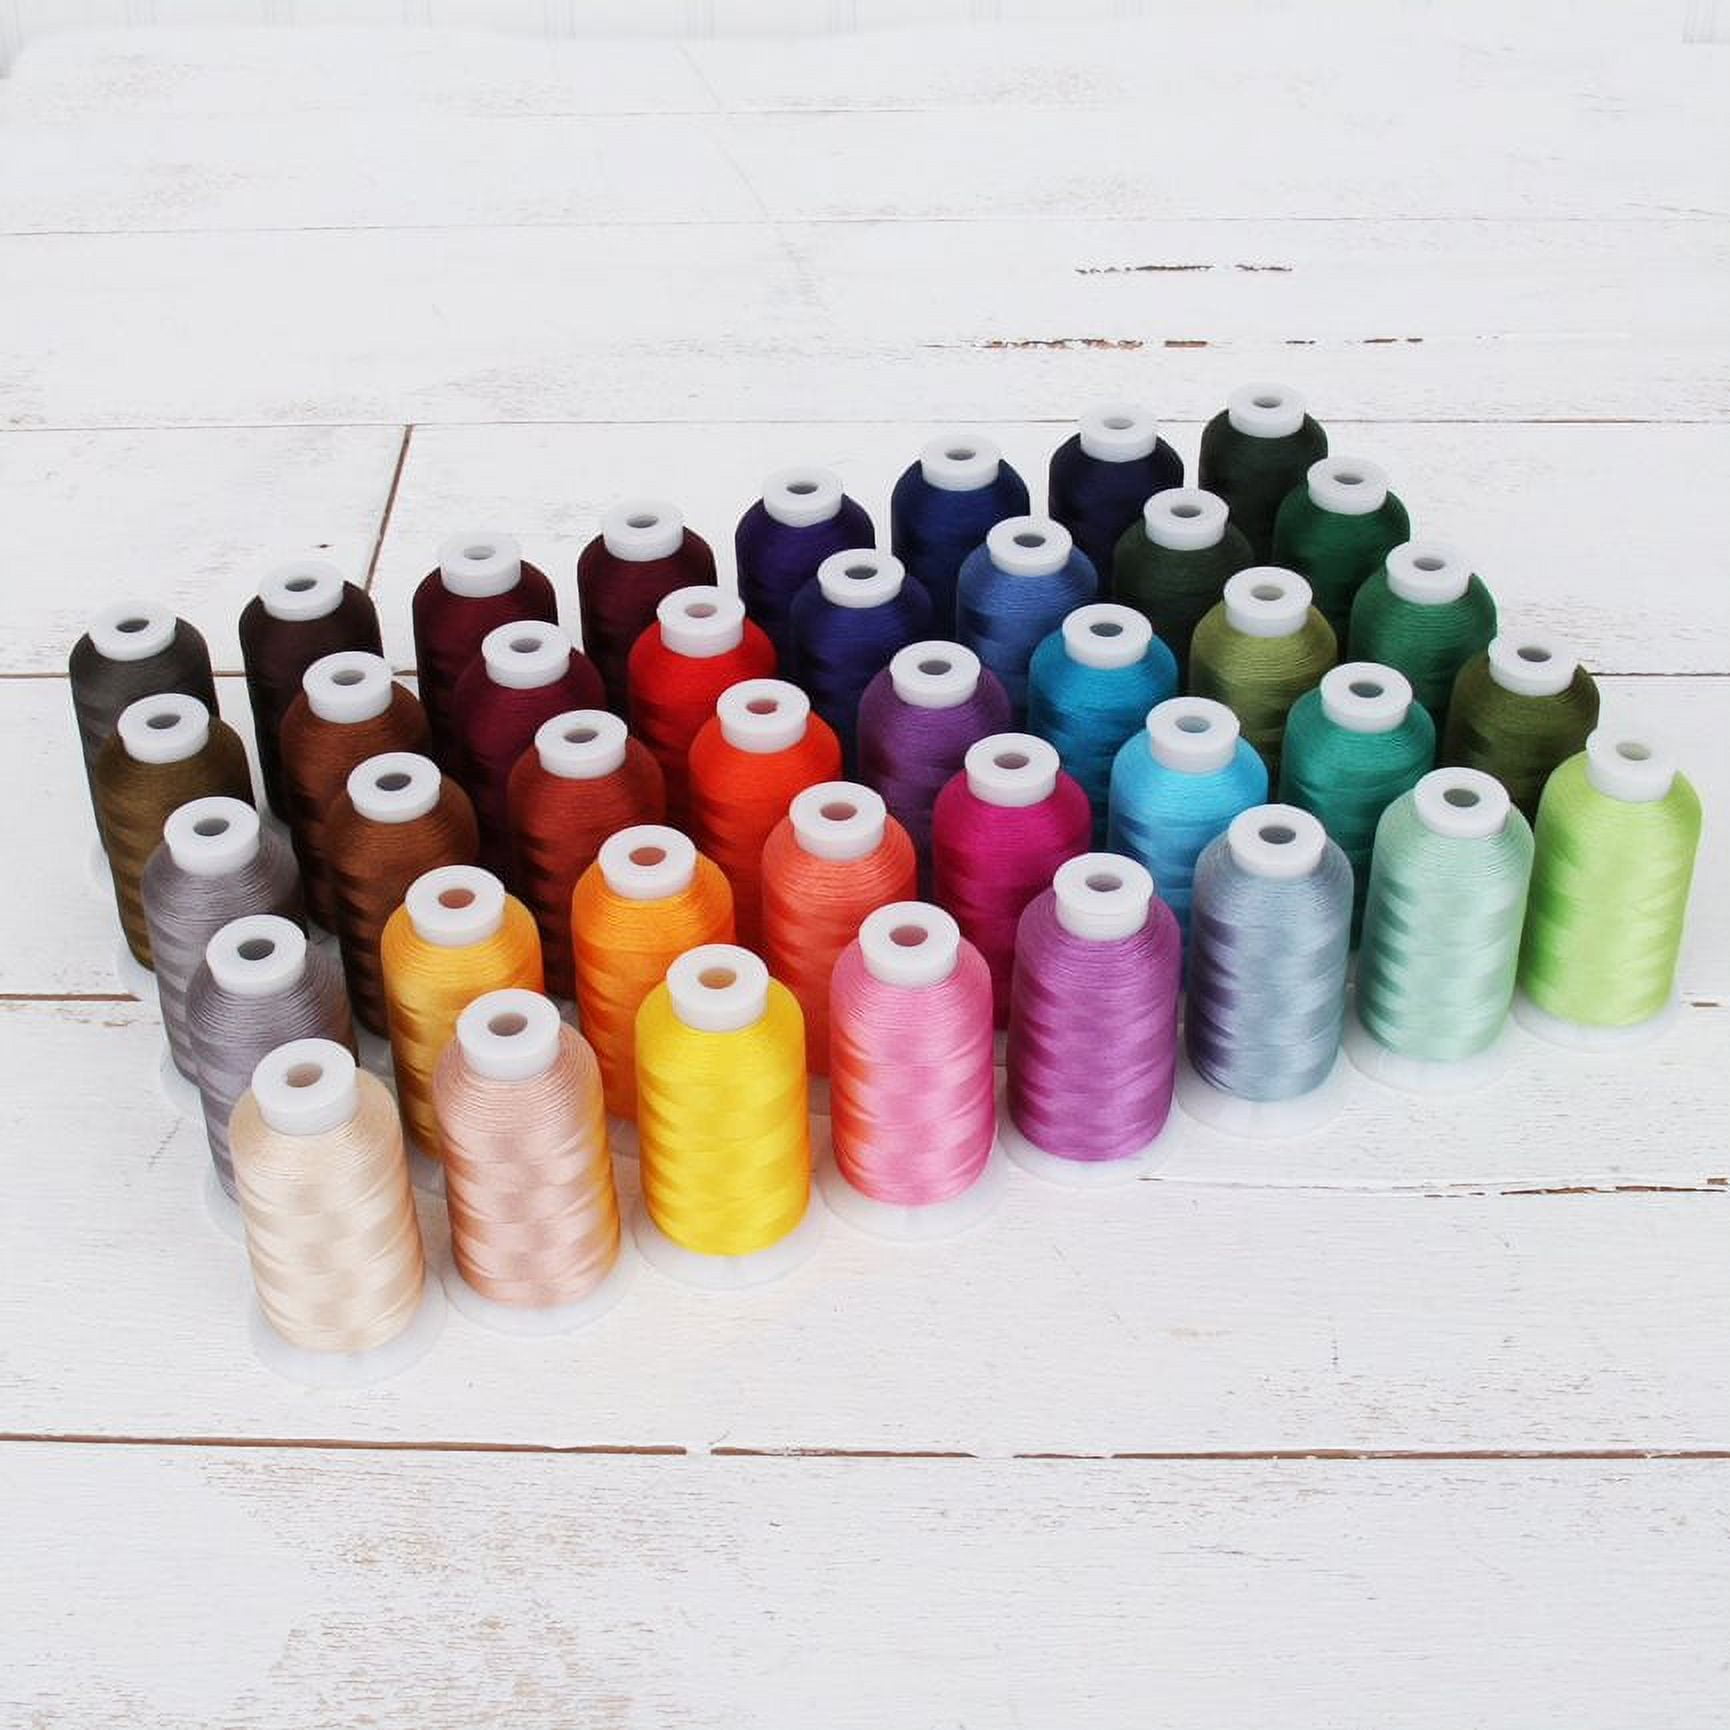 Simthreads 12 Multi Color Variegated Color Embroidery Machine Thread 1000  Meters Each for Janome Brother Pfaff Babylock Singer Bernina Husqvaran and